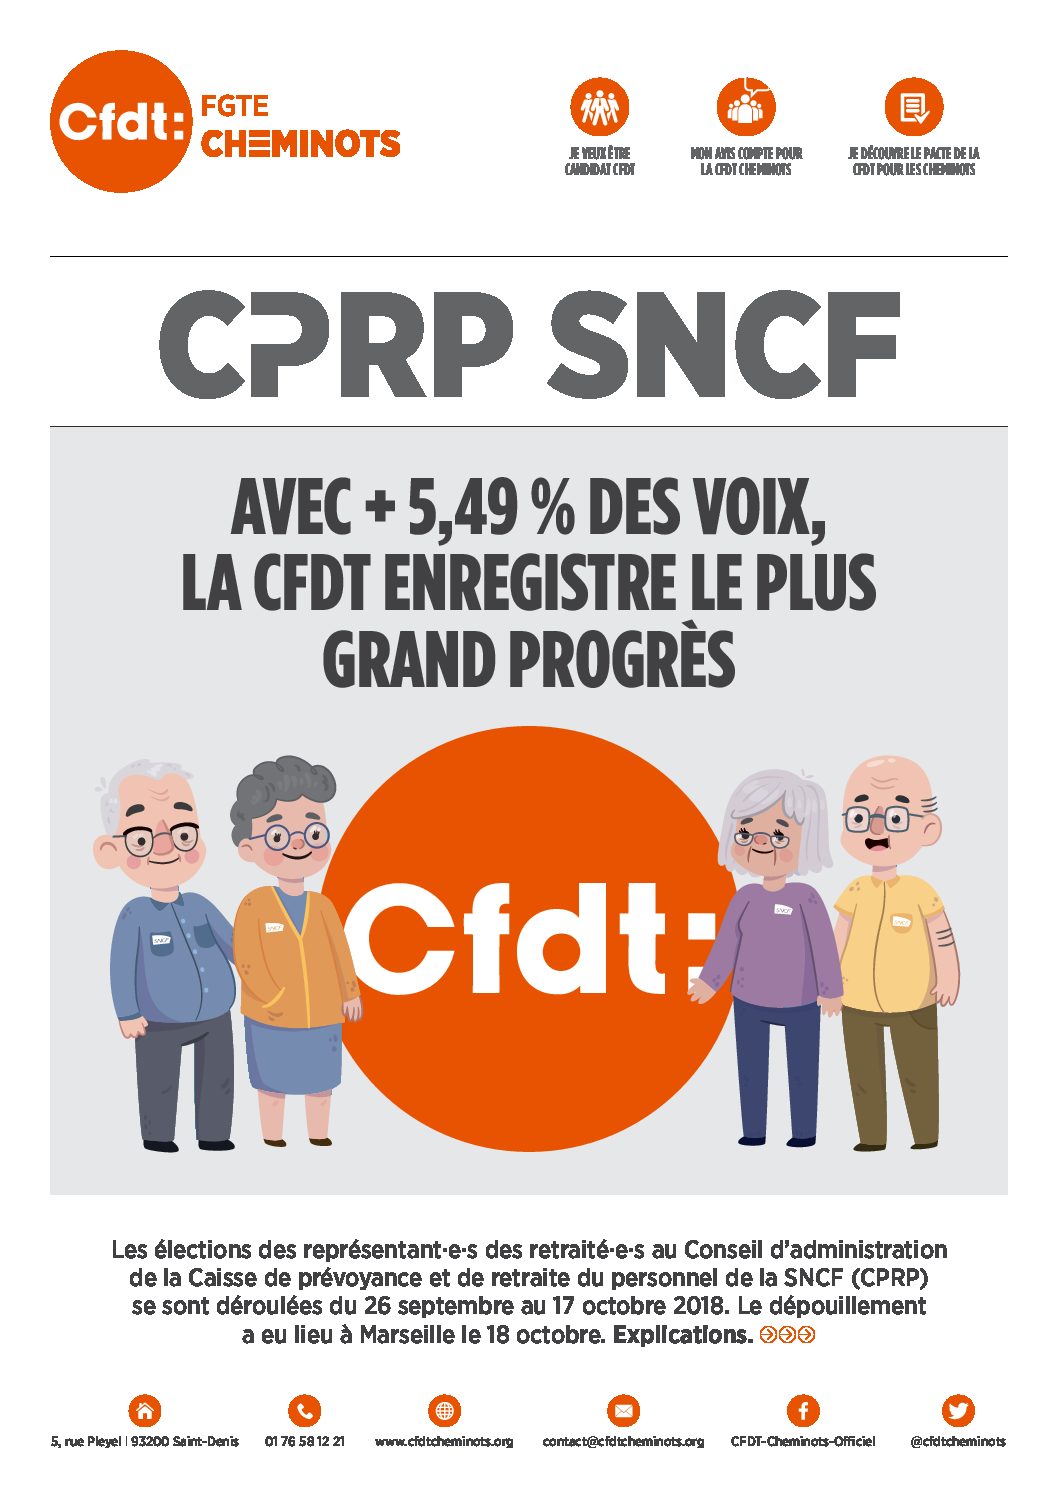 CPRP SNCF